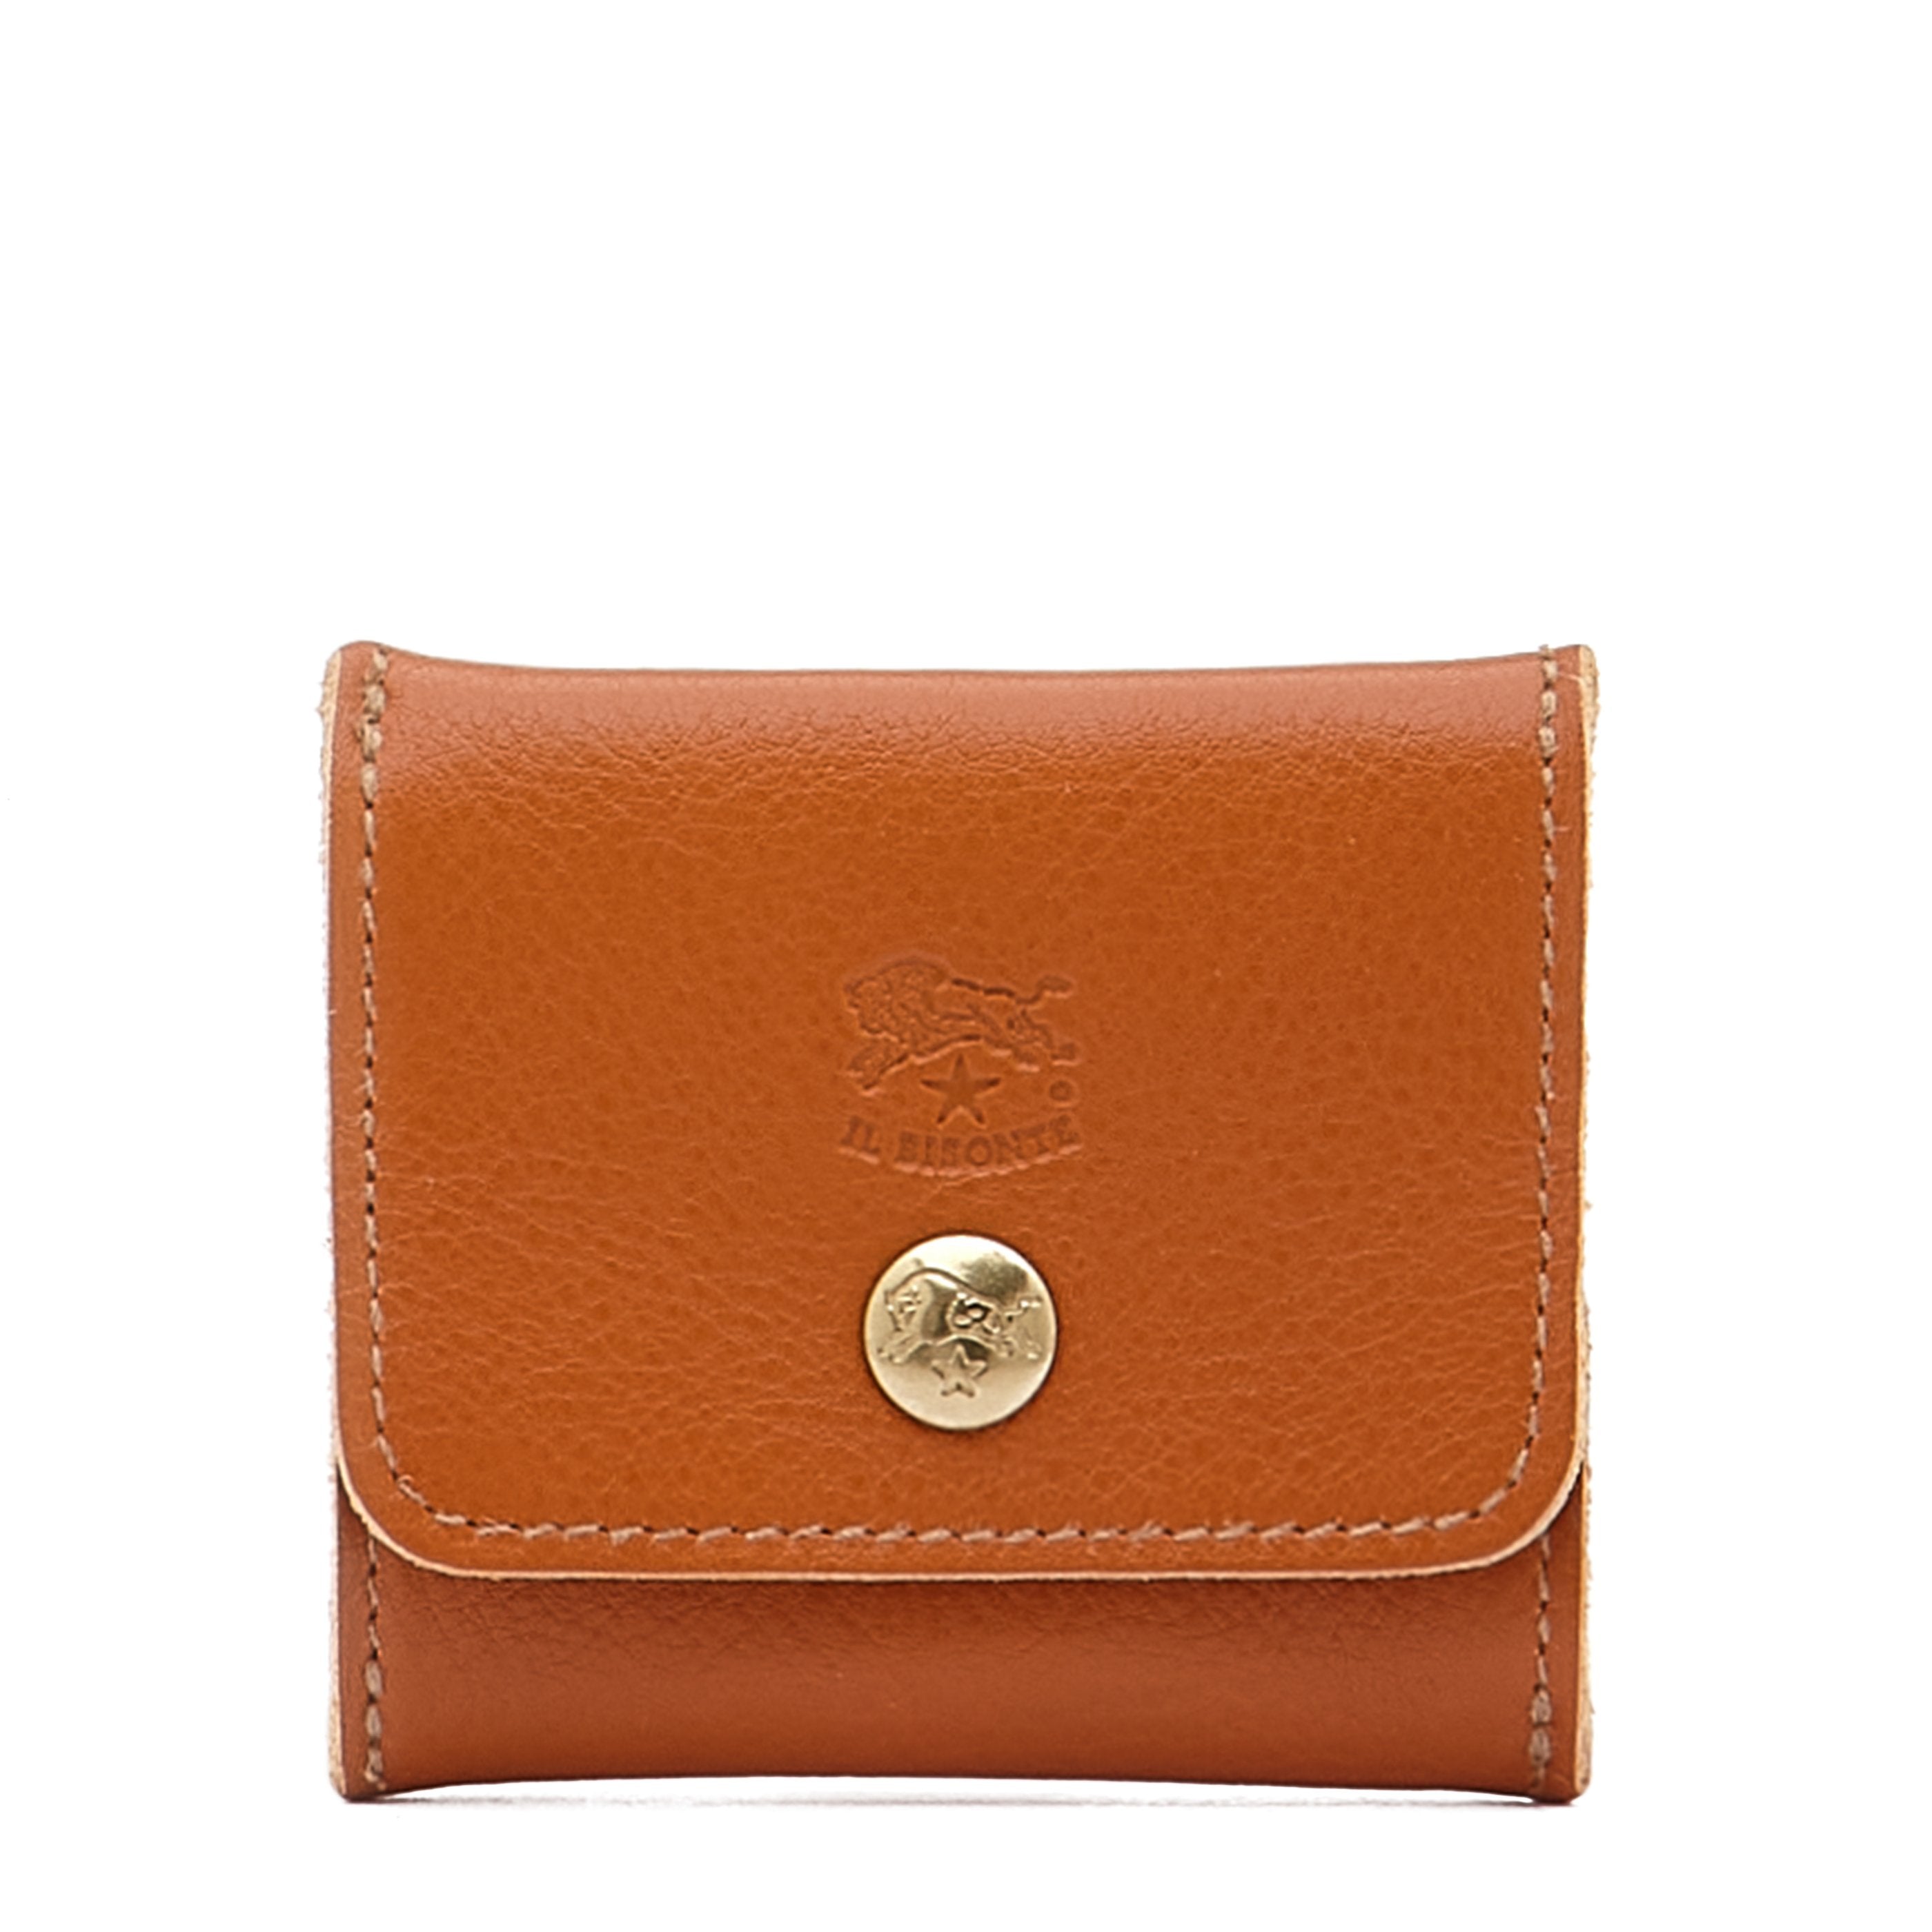 Coin purse in calf leather color caramel